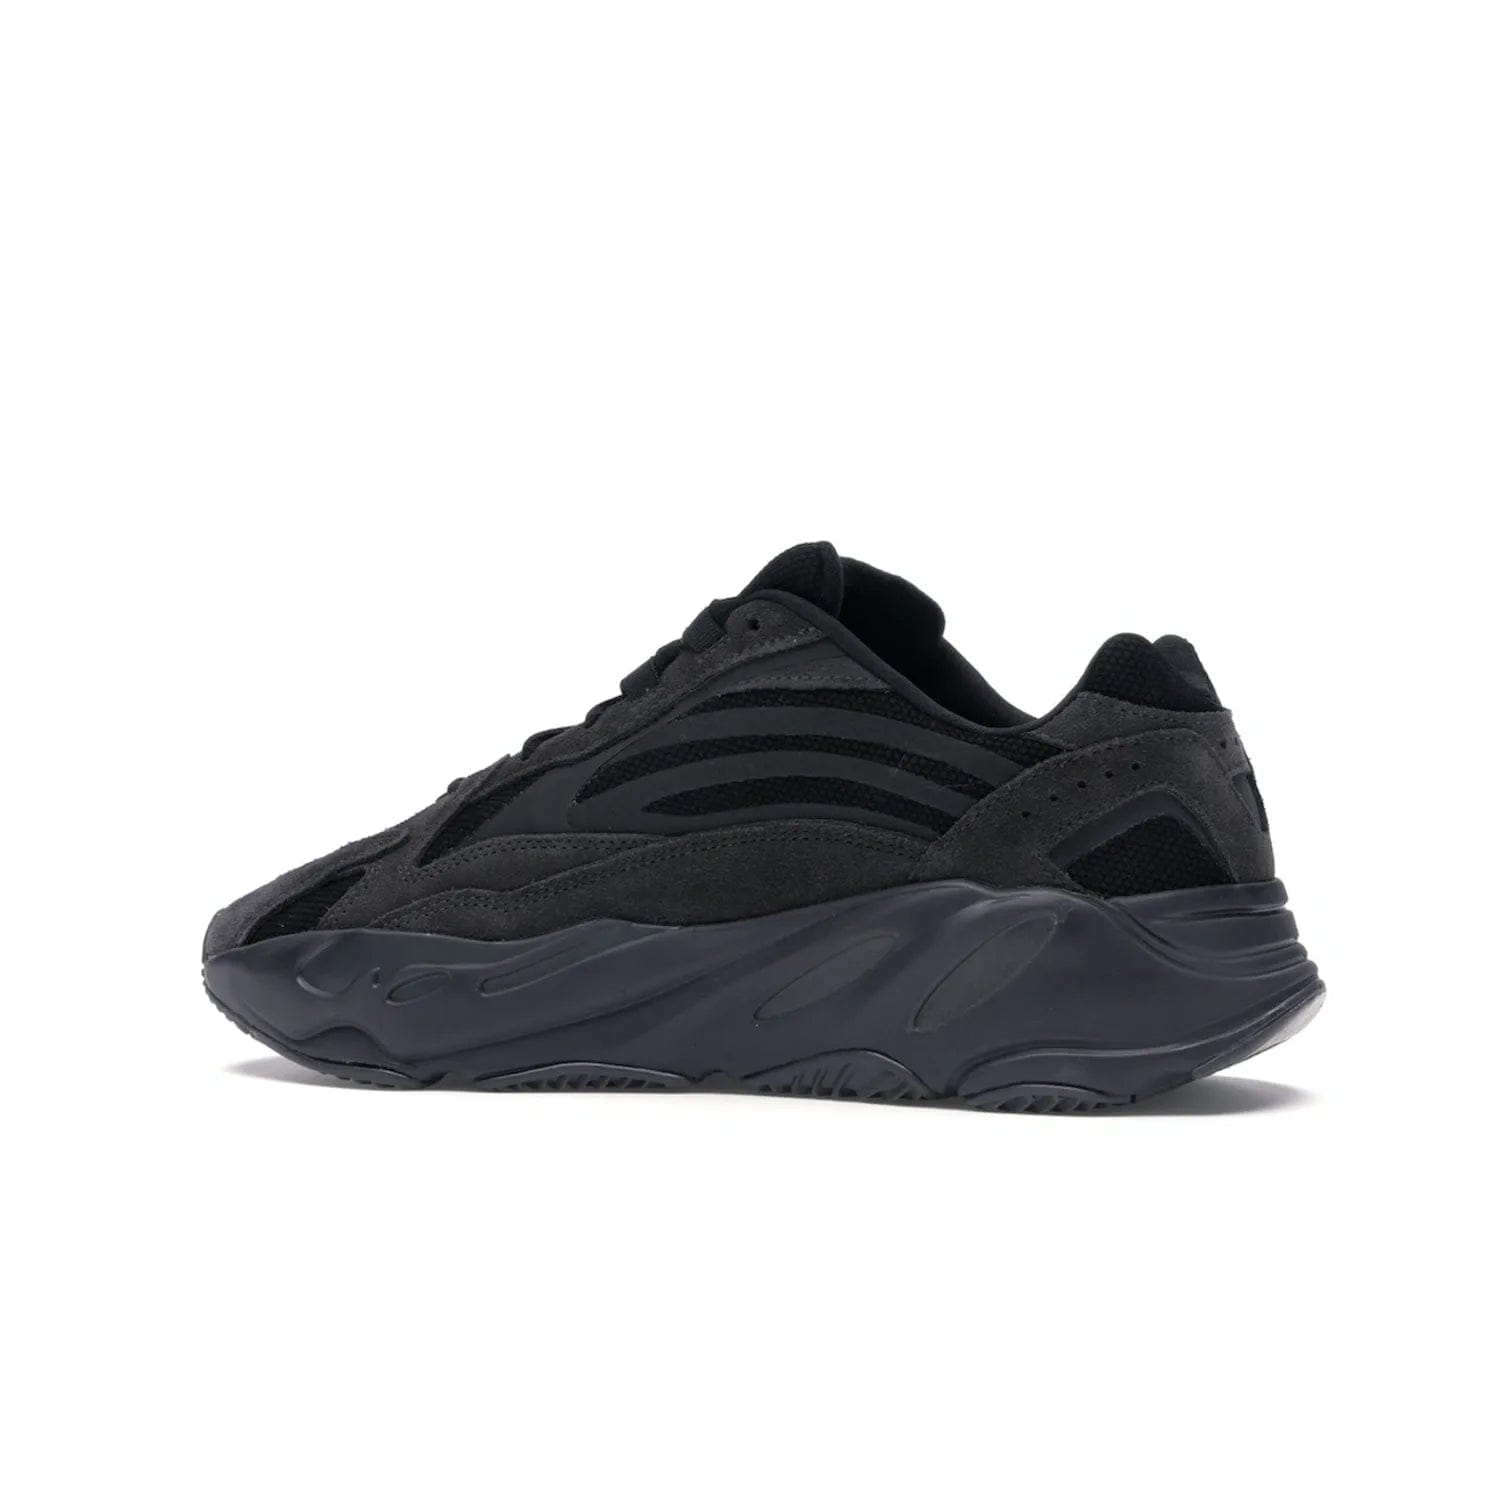 adidas Yeezy Boost 700 V2 Vanta - Image 21 - Only at www.BallersClubKickz.com - Introducing the adidas Yeezy Boost 700 V2 Vanta - a sleek and stylish all-black design featuring a combination of mesh, leather, and suede construction with signature Boost cushioning in the sole. The ultimate in comfort and support.